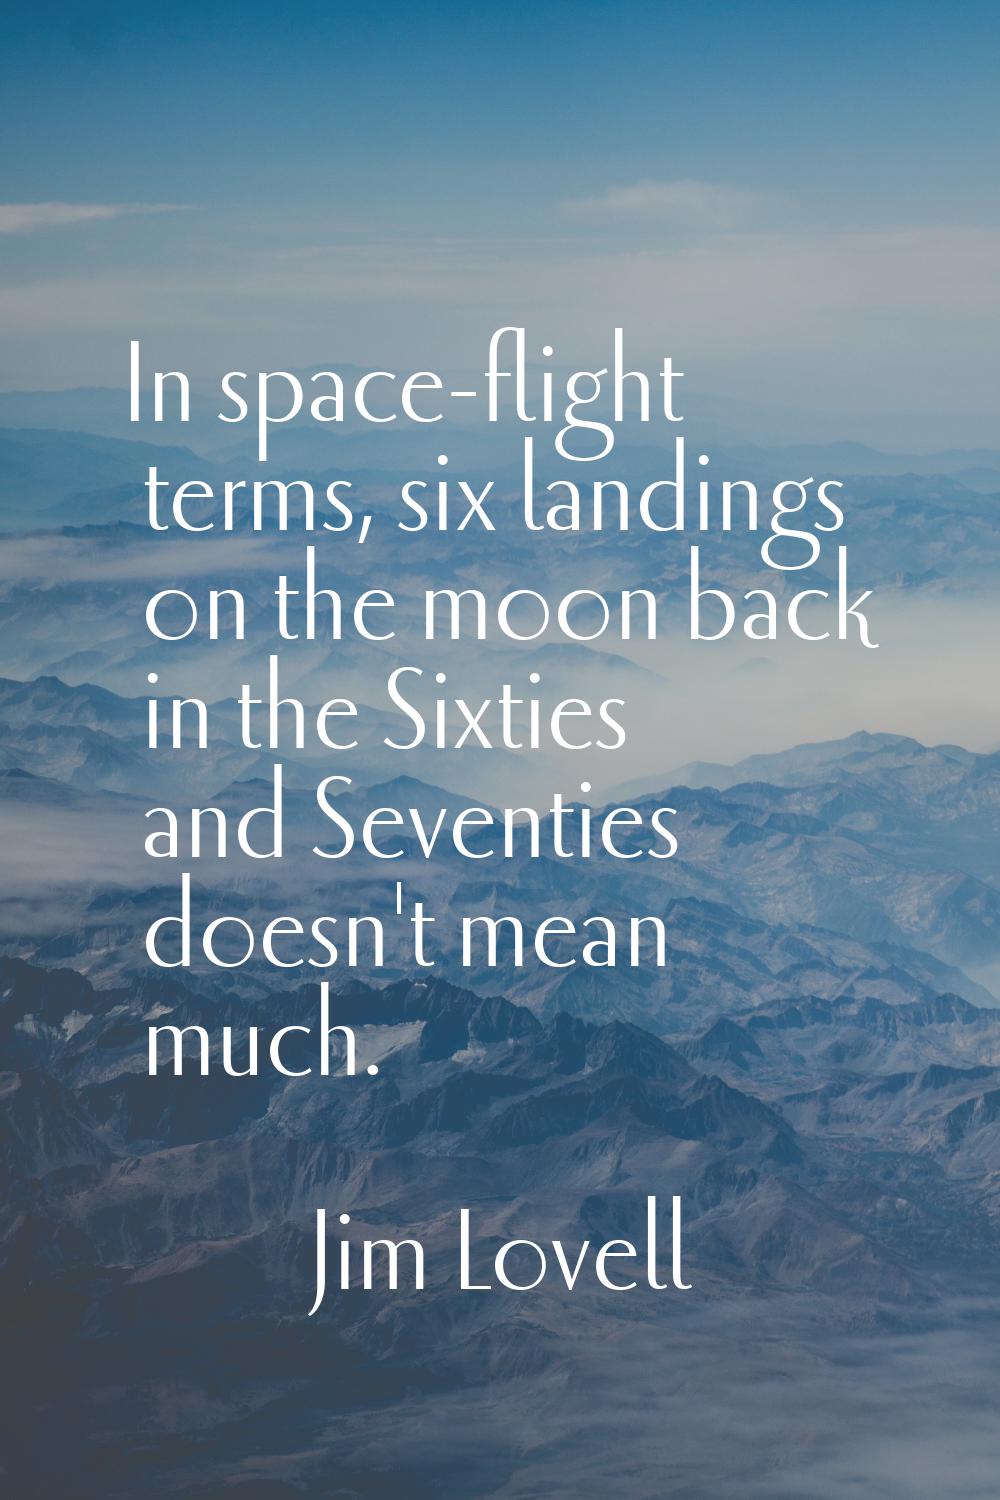 In space-flight terms, six landings on the moon back in the Sixties and Seventies doesn't mean much